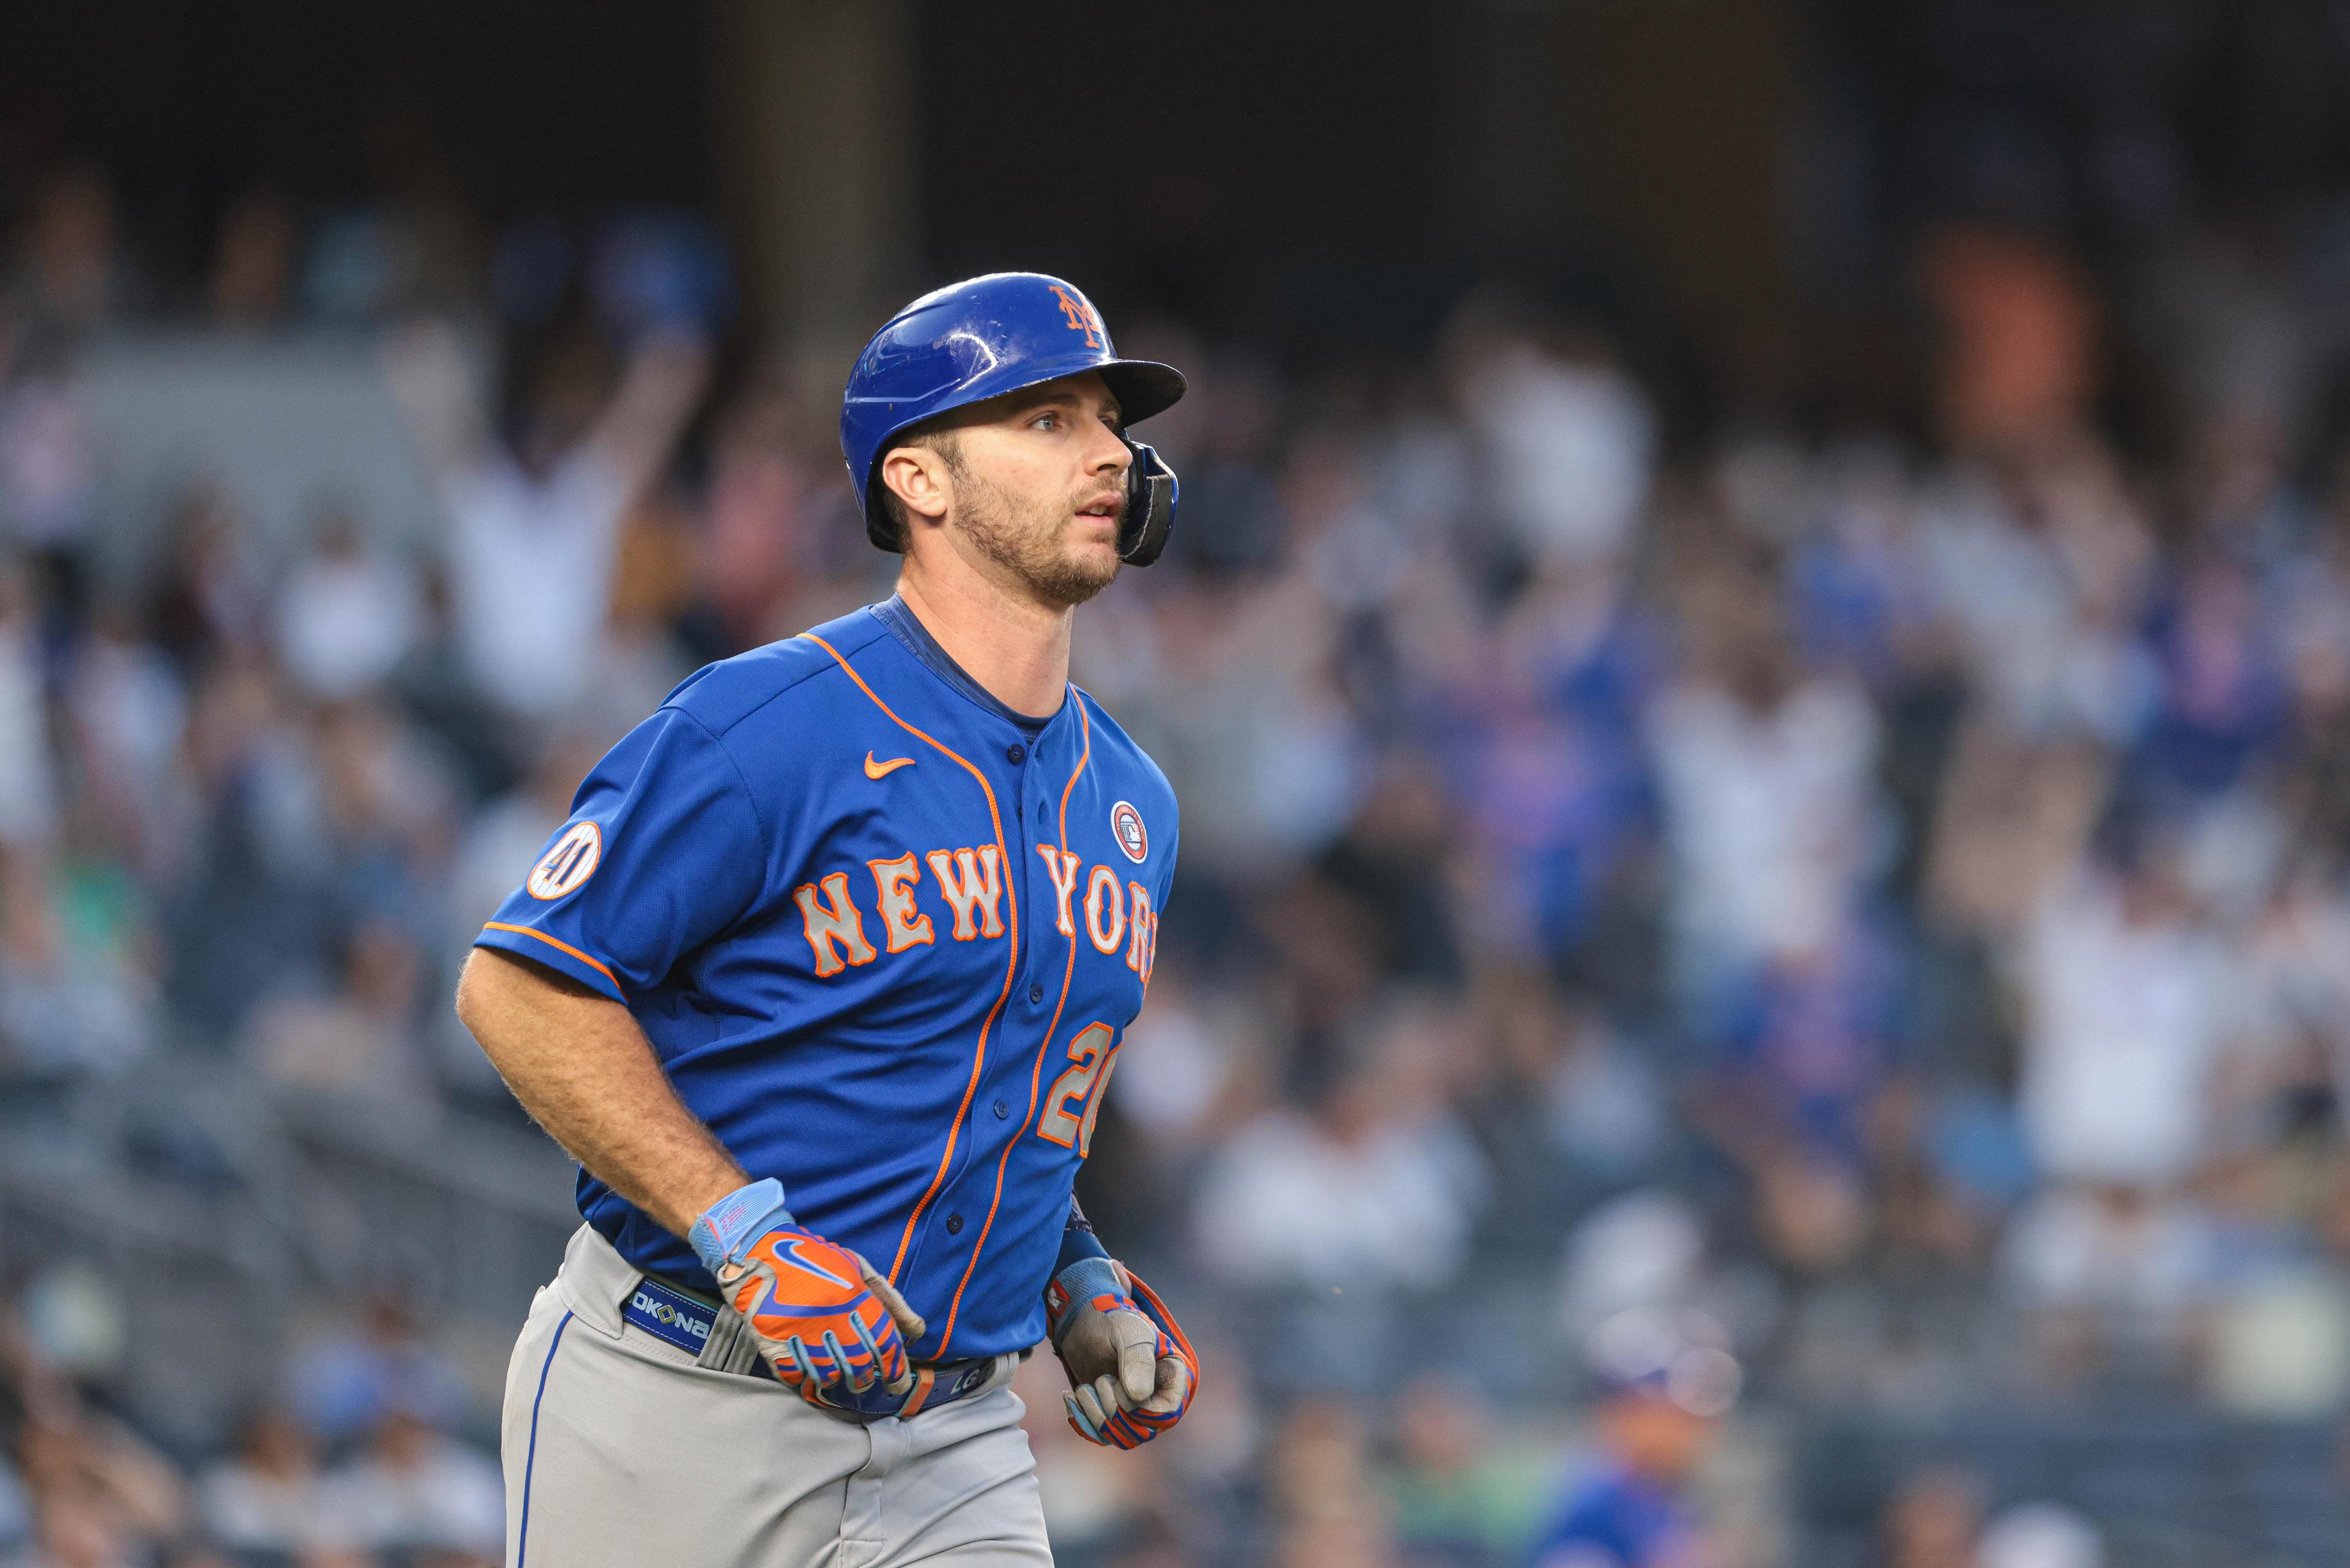 Jul 4, 2021; Bronx, New York, USA; New York Mets first baseman Pete Alonso (20) looks up after hitting a two run home run during the third inning against the New York Yankees at Yankee Stadium. Mandatory Credit: Vincent Carchietta-USA TODAY Sports / Vincent Carchietta-USA TODAY Sports